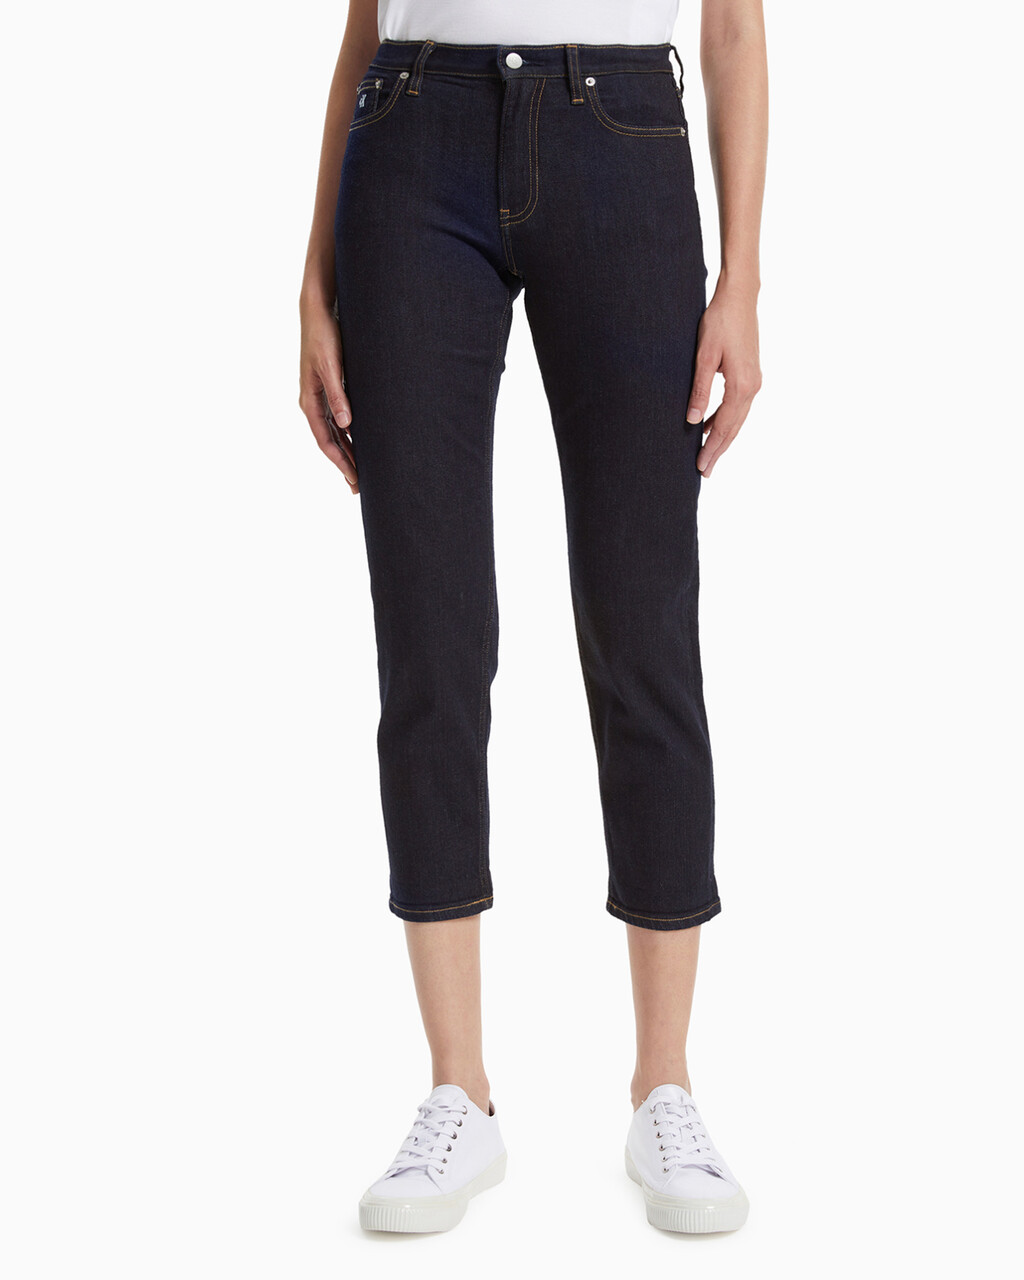 Mid Rise Body Fit Jeans, Acd Rinse, hi-res